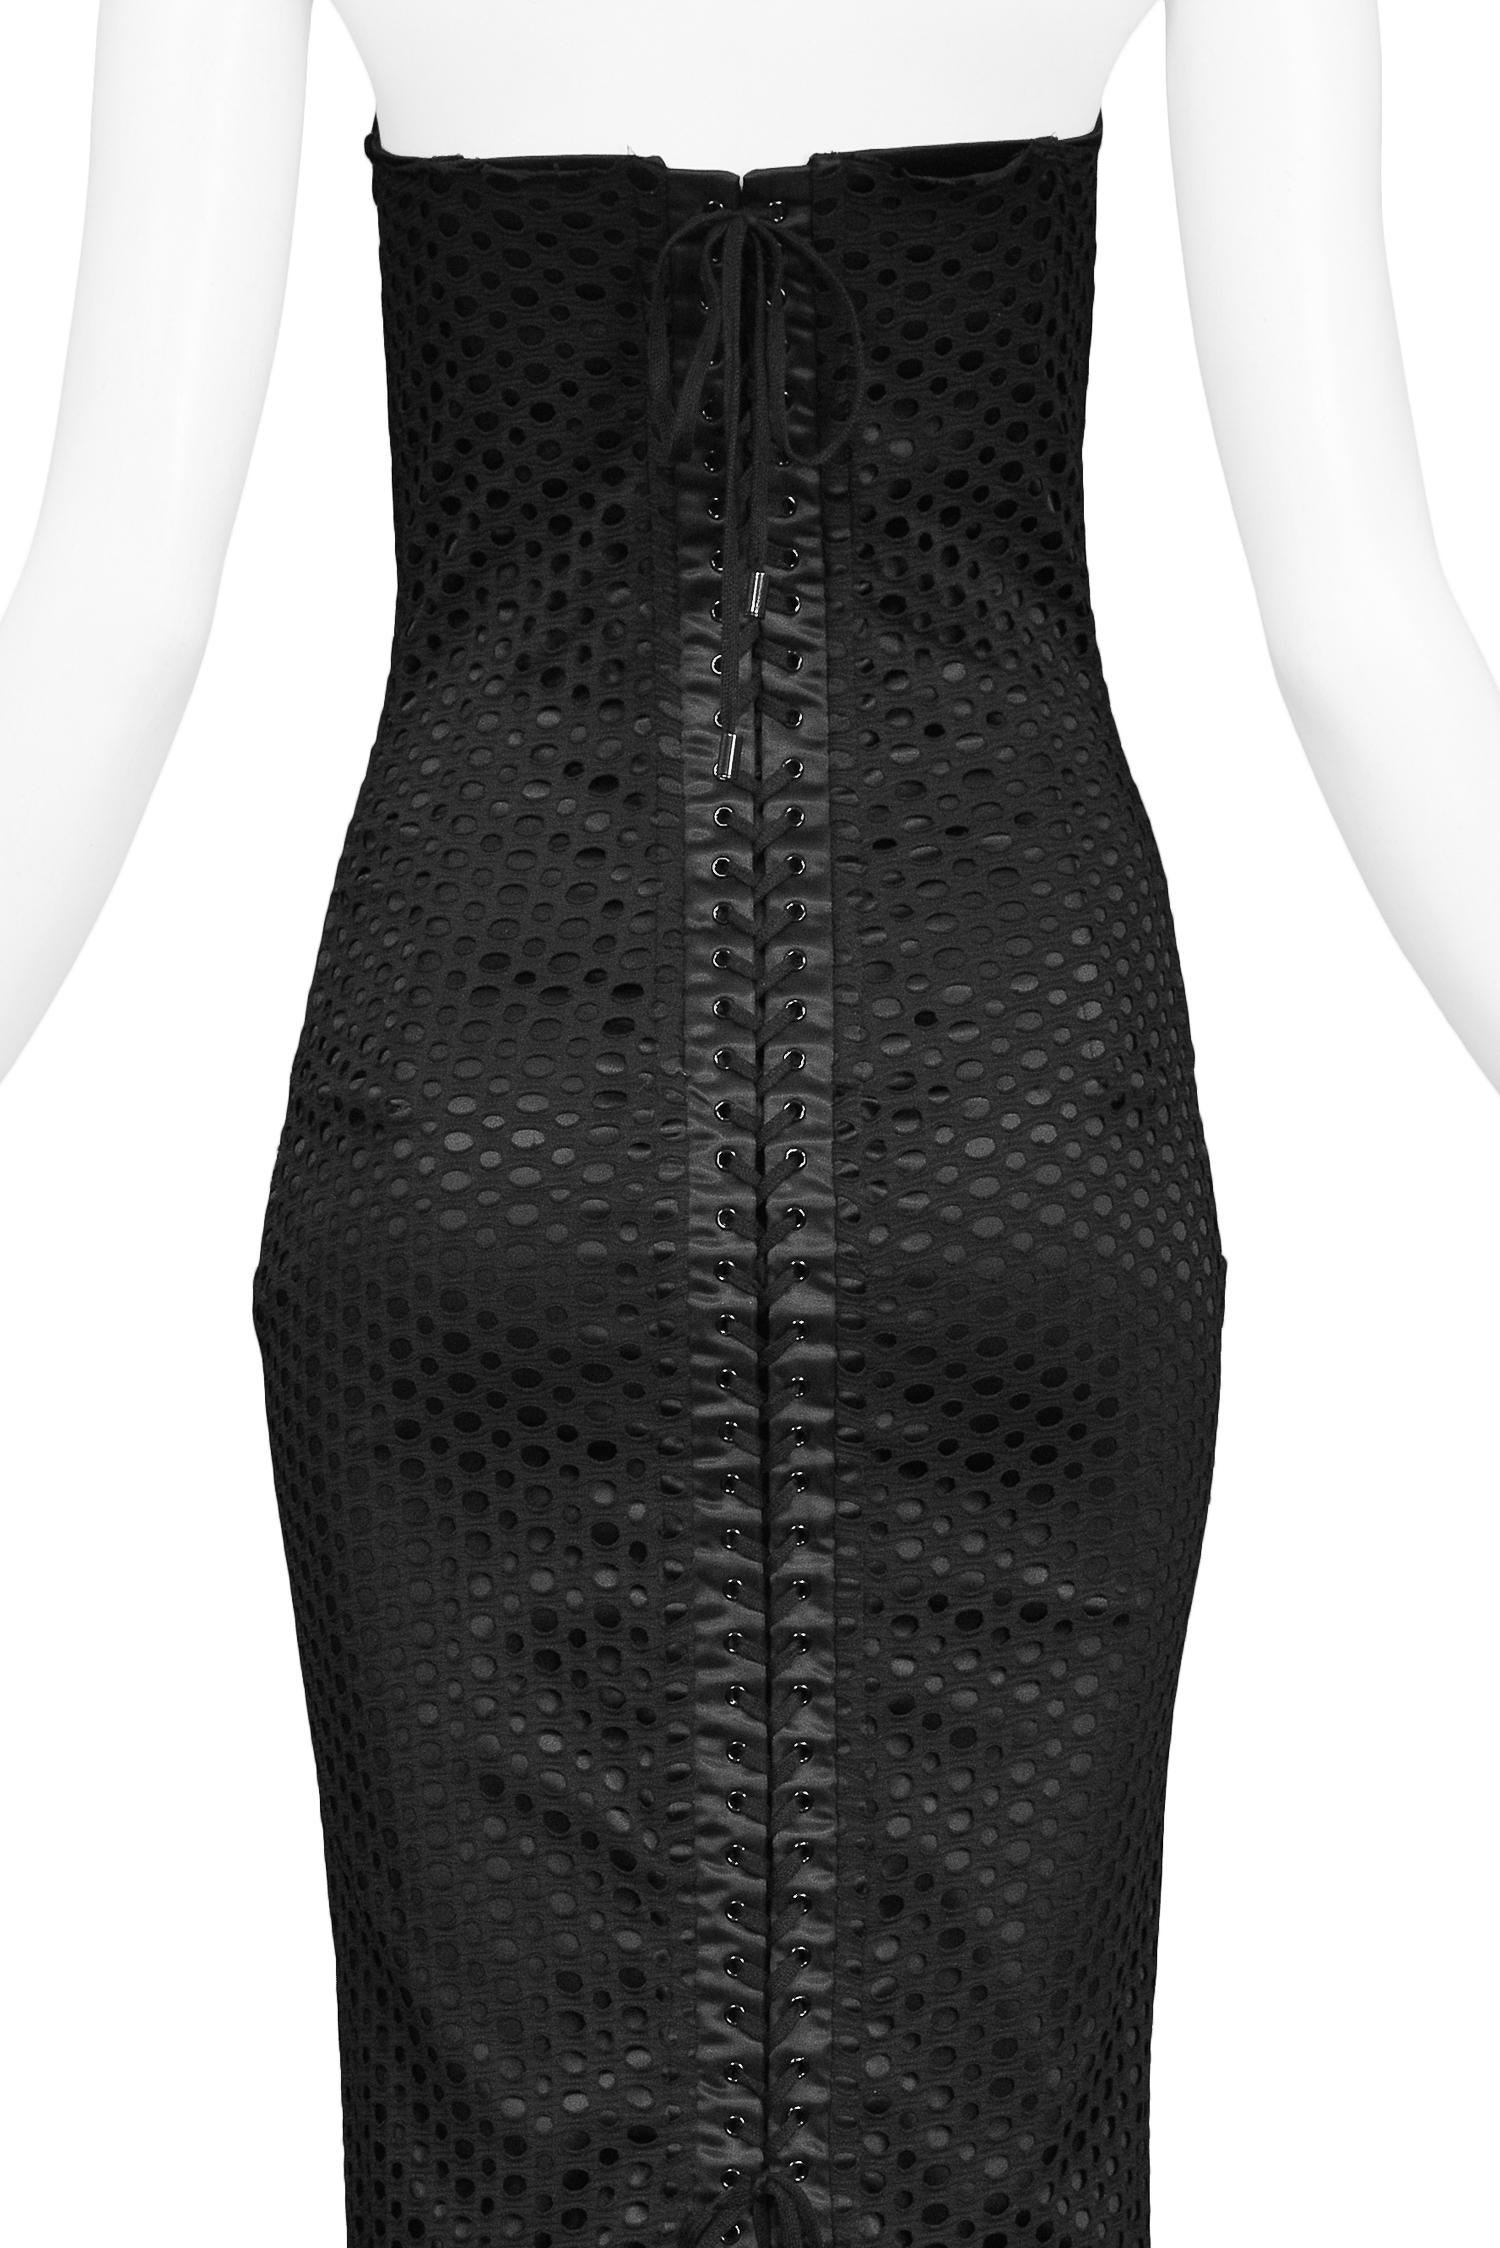 Dolce & Gabbana Black Perforated Mesh Dress In Excellent Condition In Los Angeles, CA